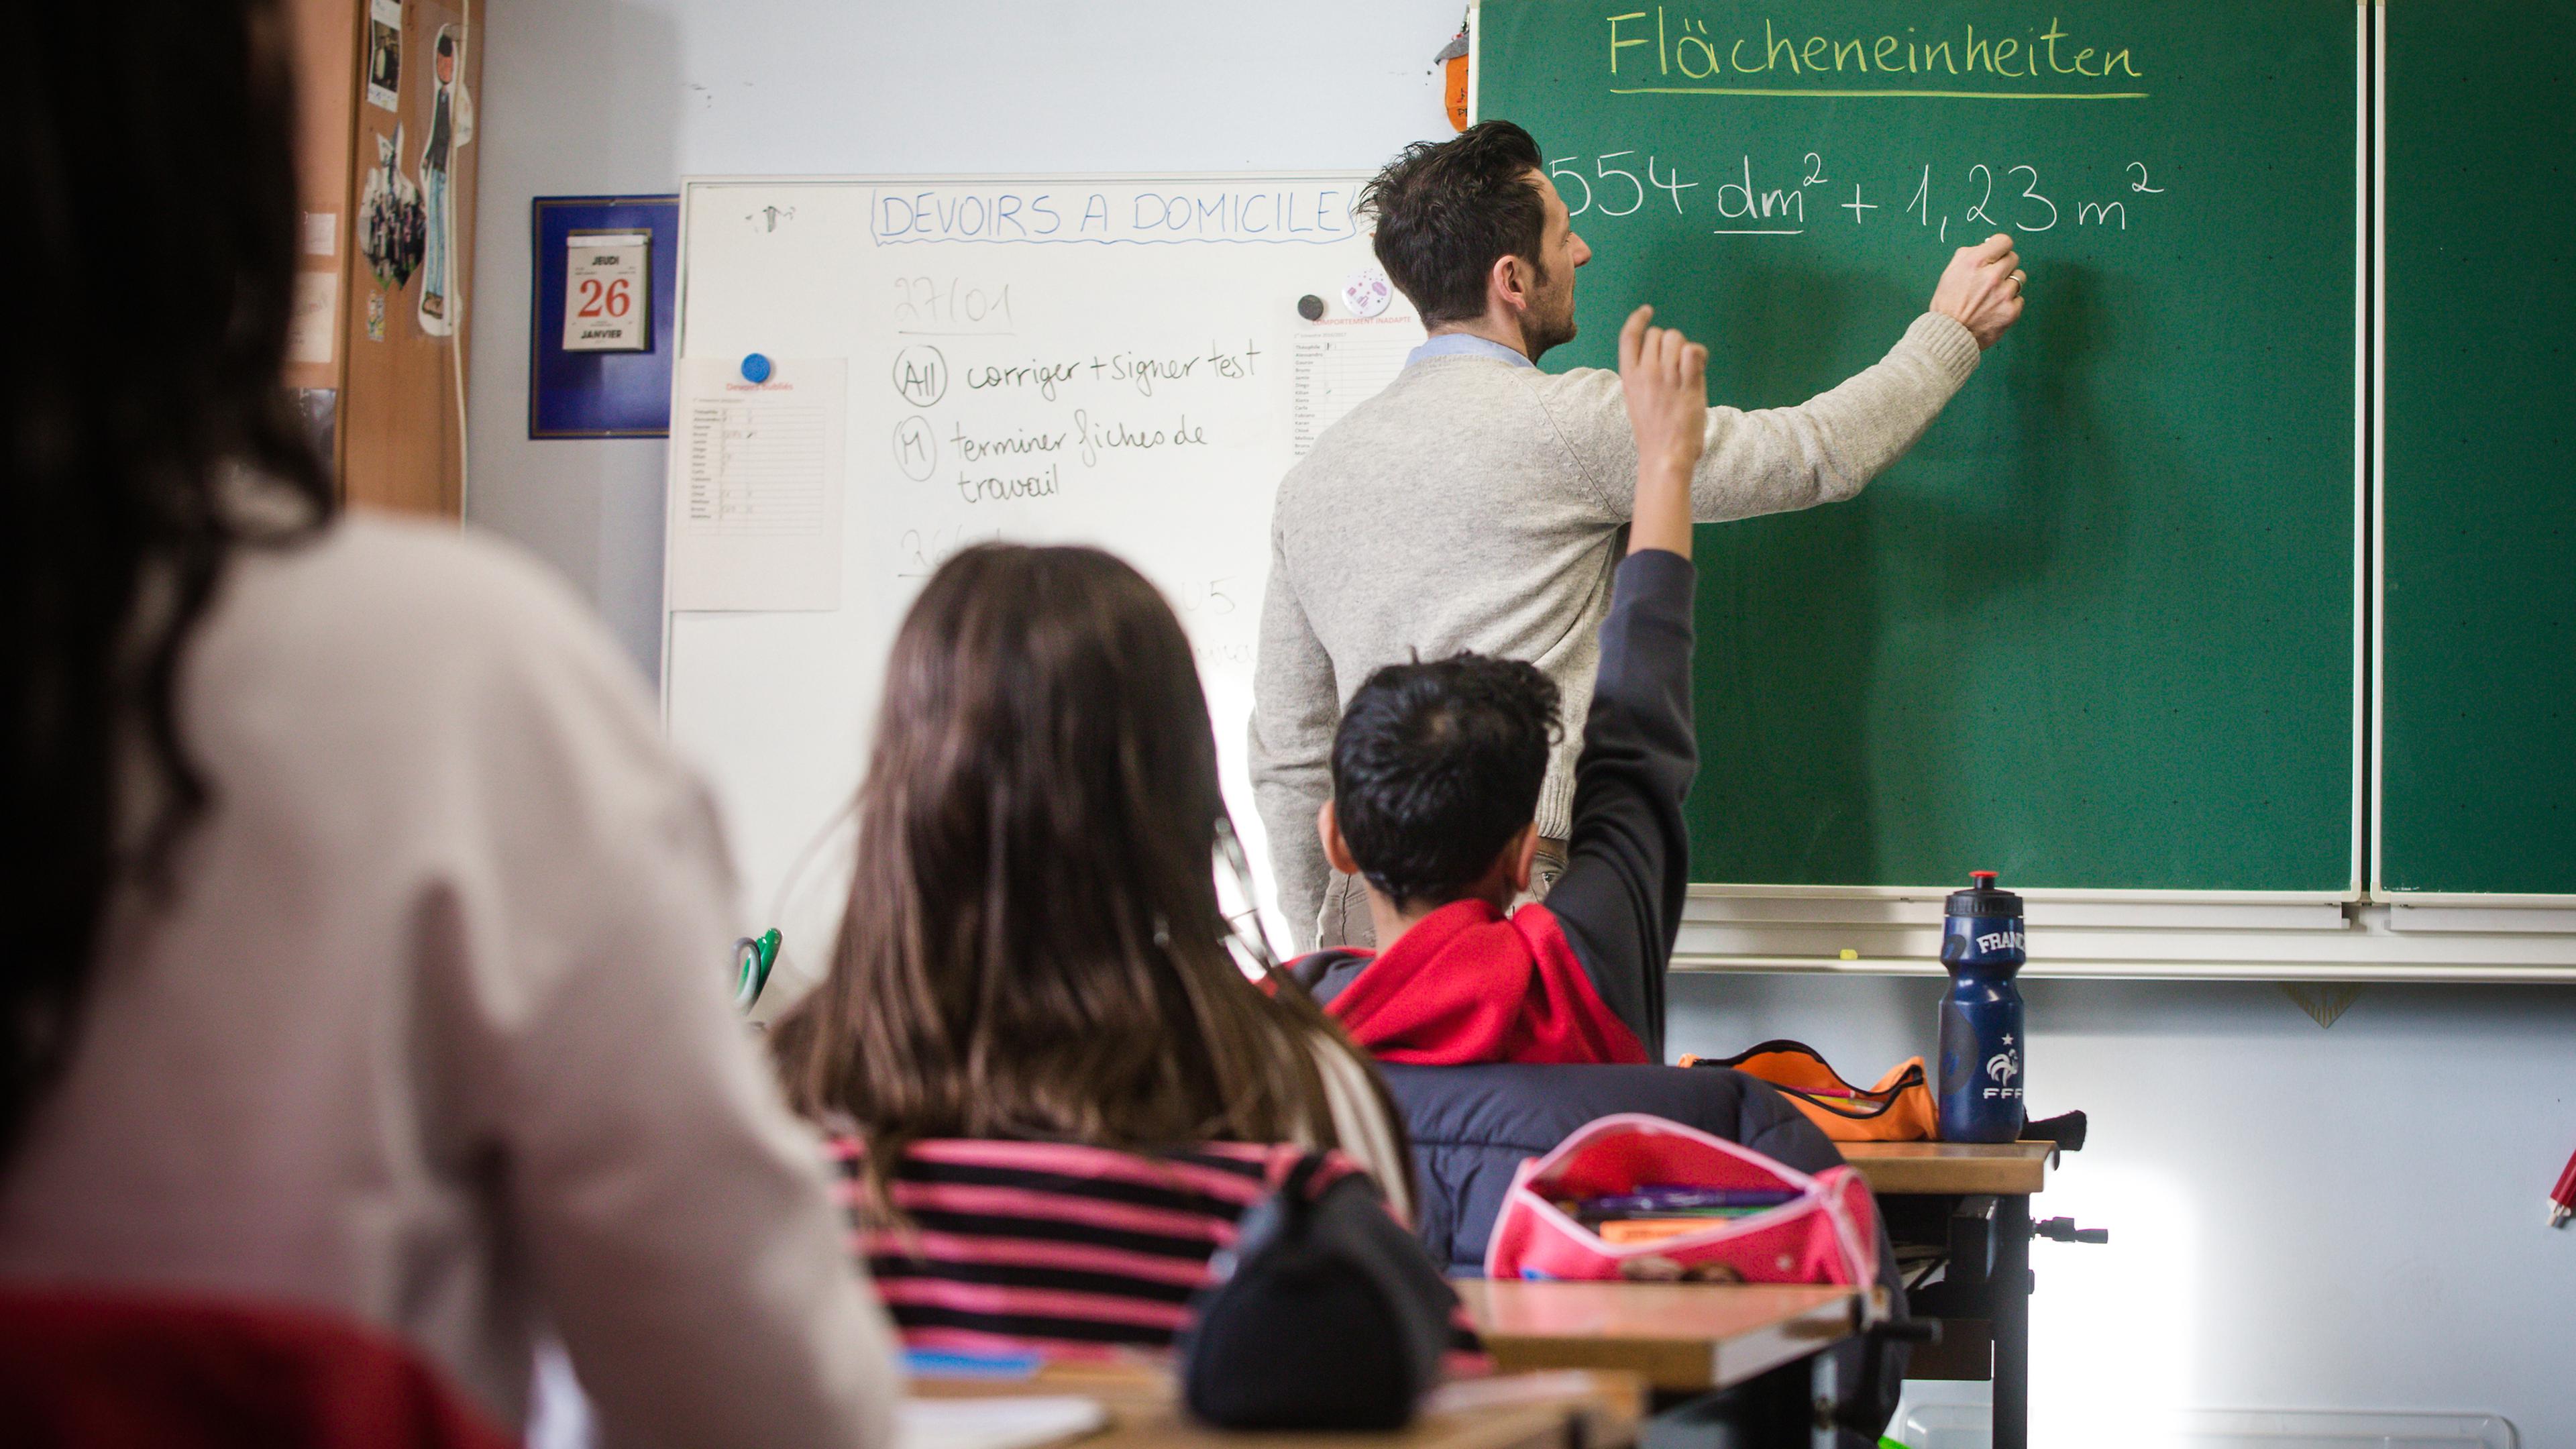 Luxembourg teachers are among the best-paid, figures from the OECD show